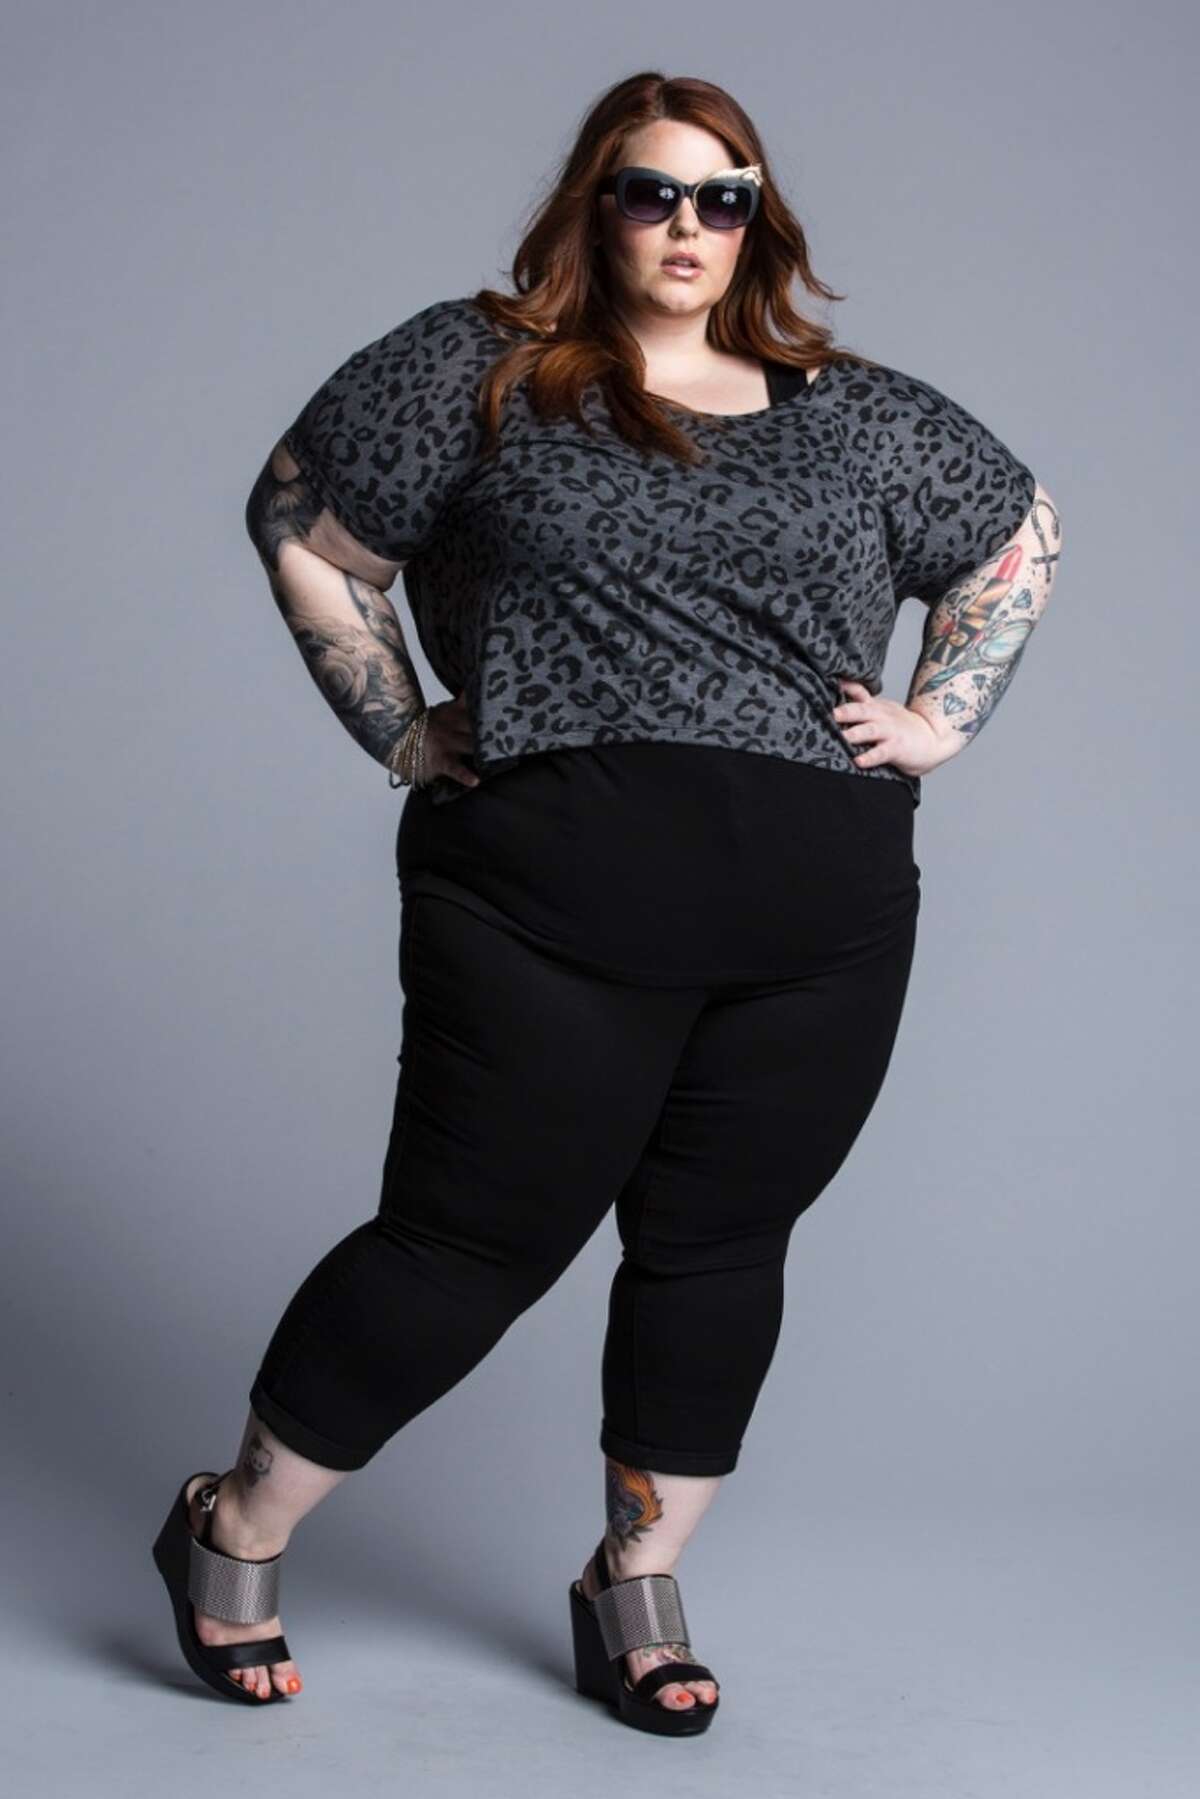 Plus Size Model Holliday